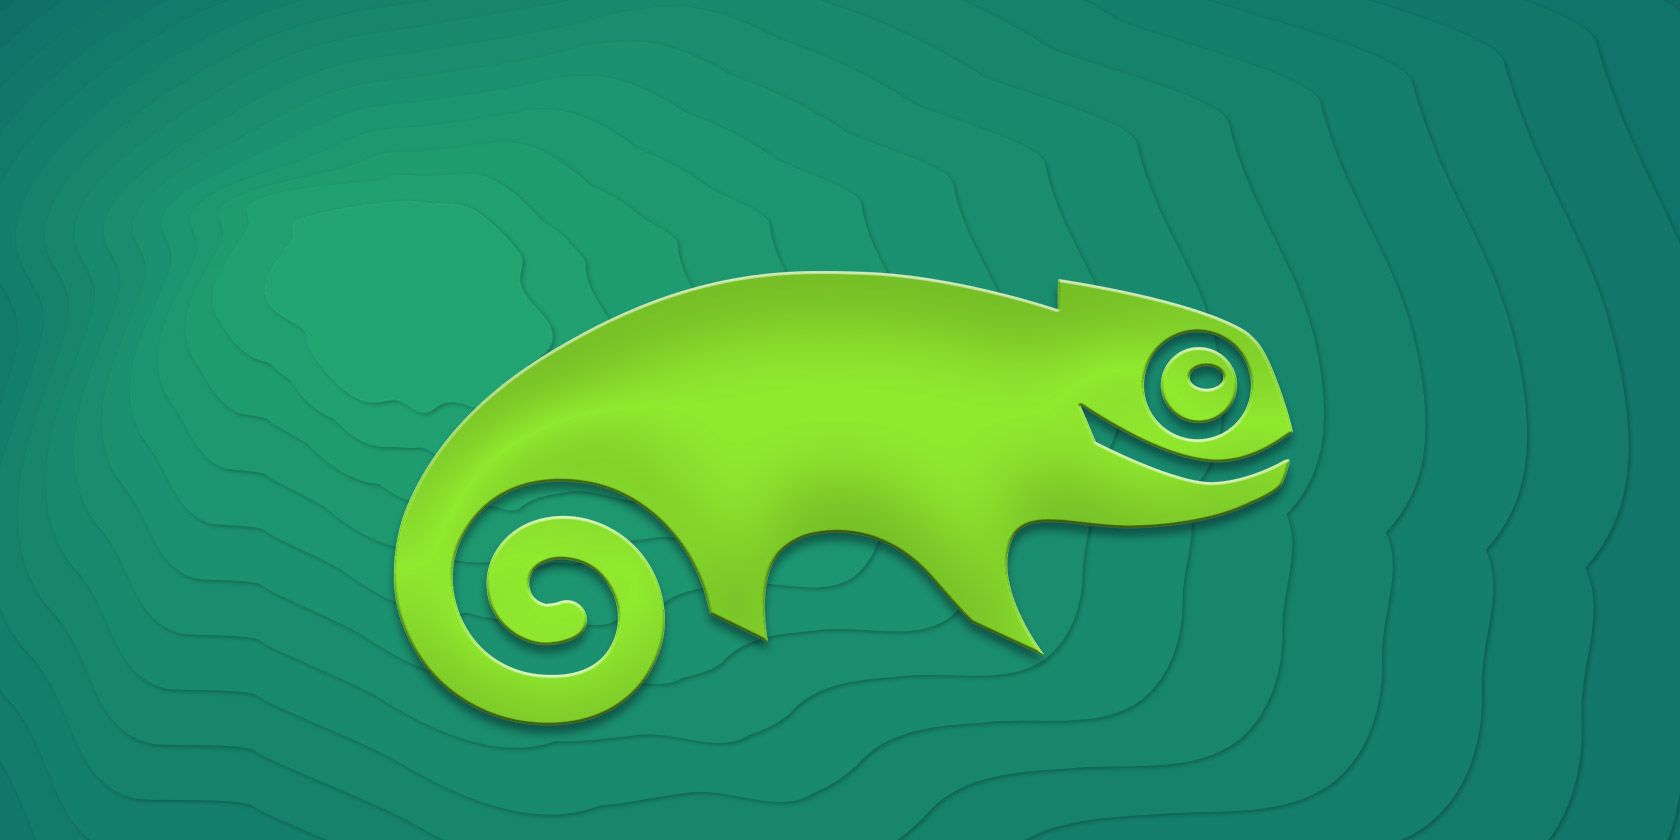 opensuse-reasons